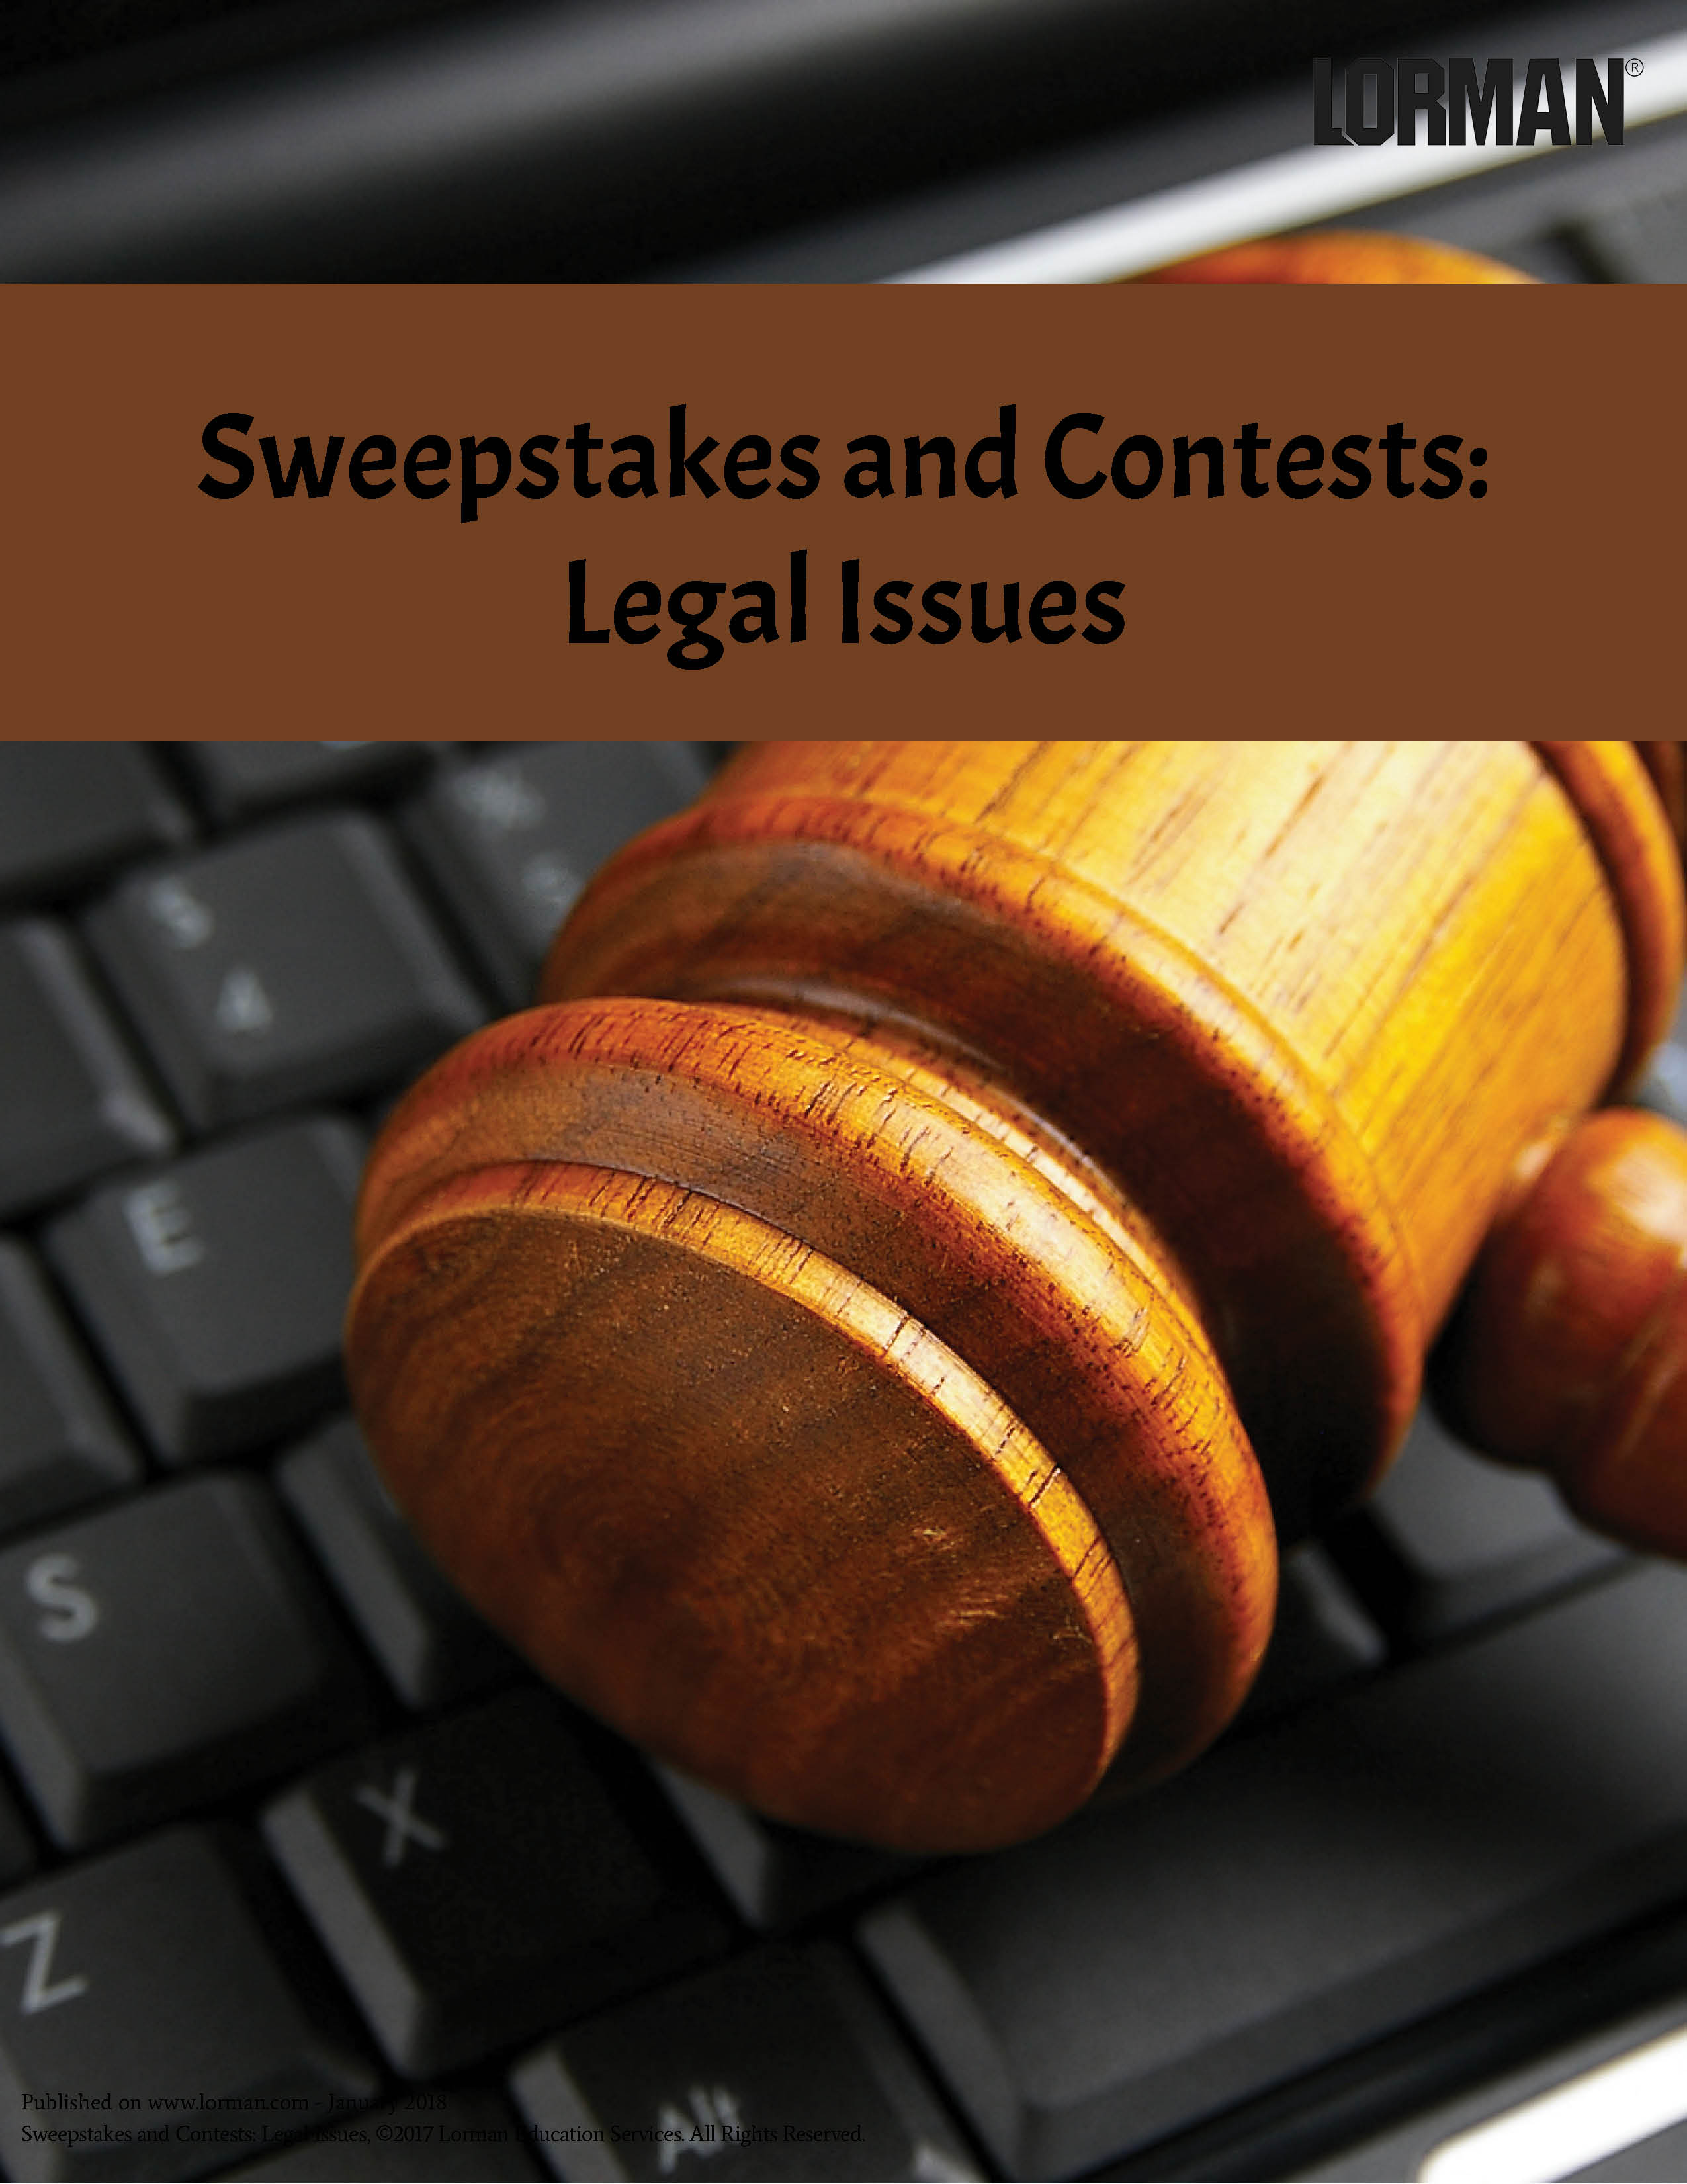 Sweepstakes and Contests: Legal Issues